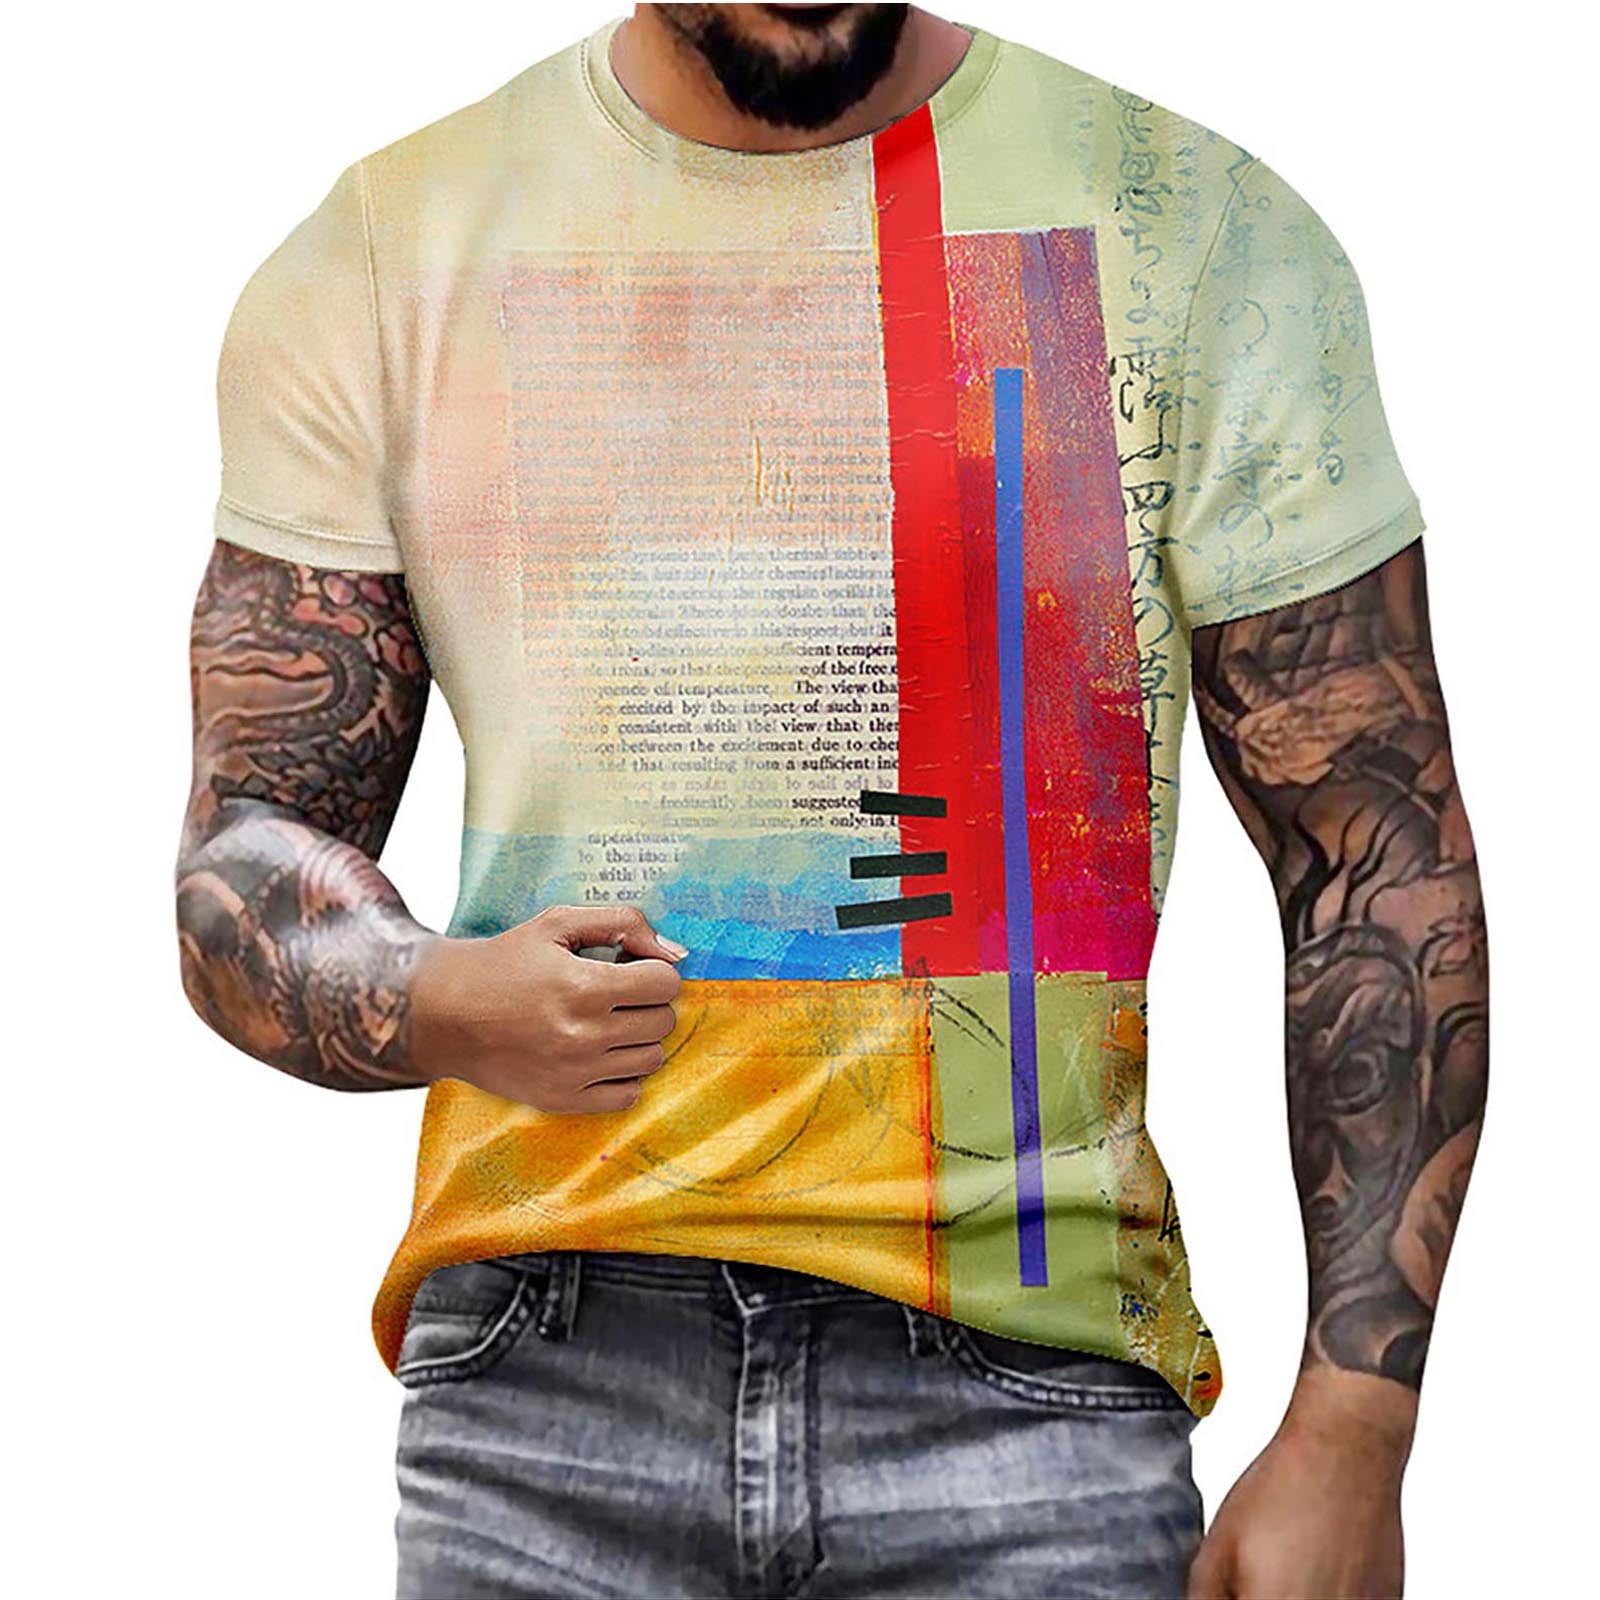 HAPIMO Round Neck Fashion Tops Men's Summer Fitness Sports Shirts 3D  Digital Graffiti Graphic Print Blouse Short Sleeve T-Shirt for Men Casual  Slim Fit Tee Clothes Red XXL 